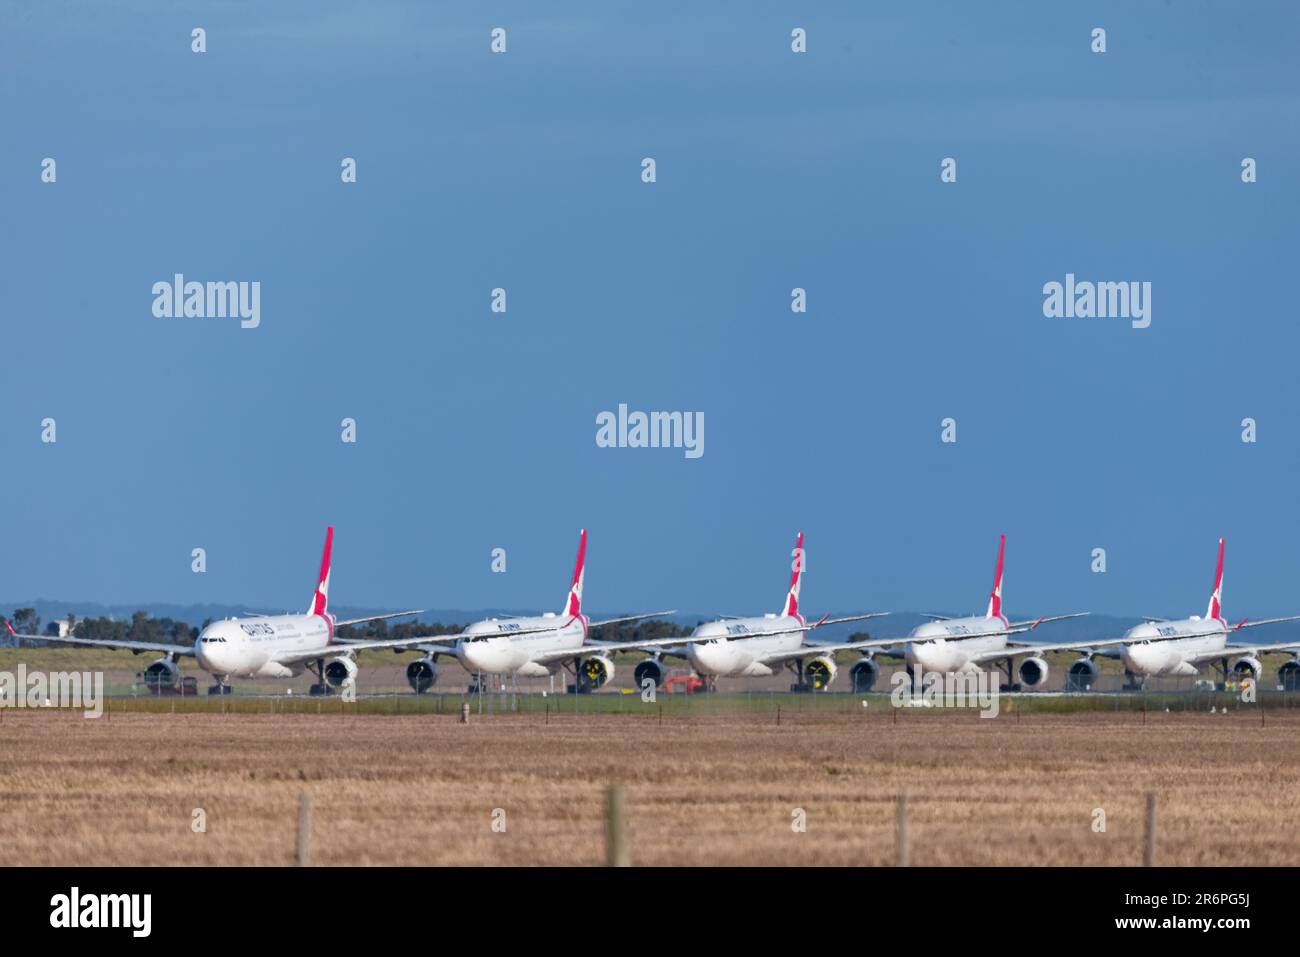 MELBOURNE, AUSTRALIA - APRIL 27: Amid an unprecedented decline in air travel due to COVID 19 Qantas and Jetstar are having to ground their aircraft. Qantas aircraft stowed at Avalon Airport on 27 April, 2020 in Melbourne, Australia. Stock Photo